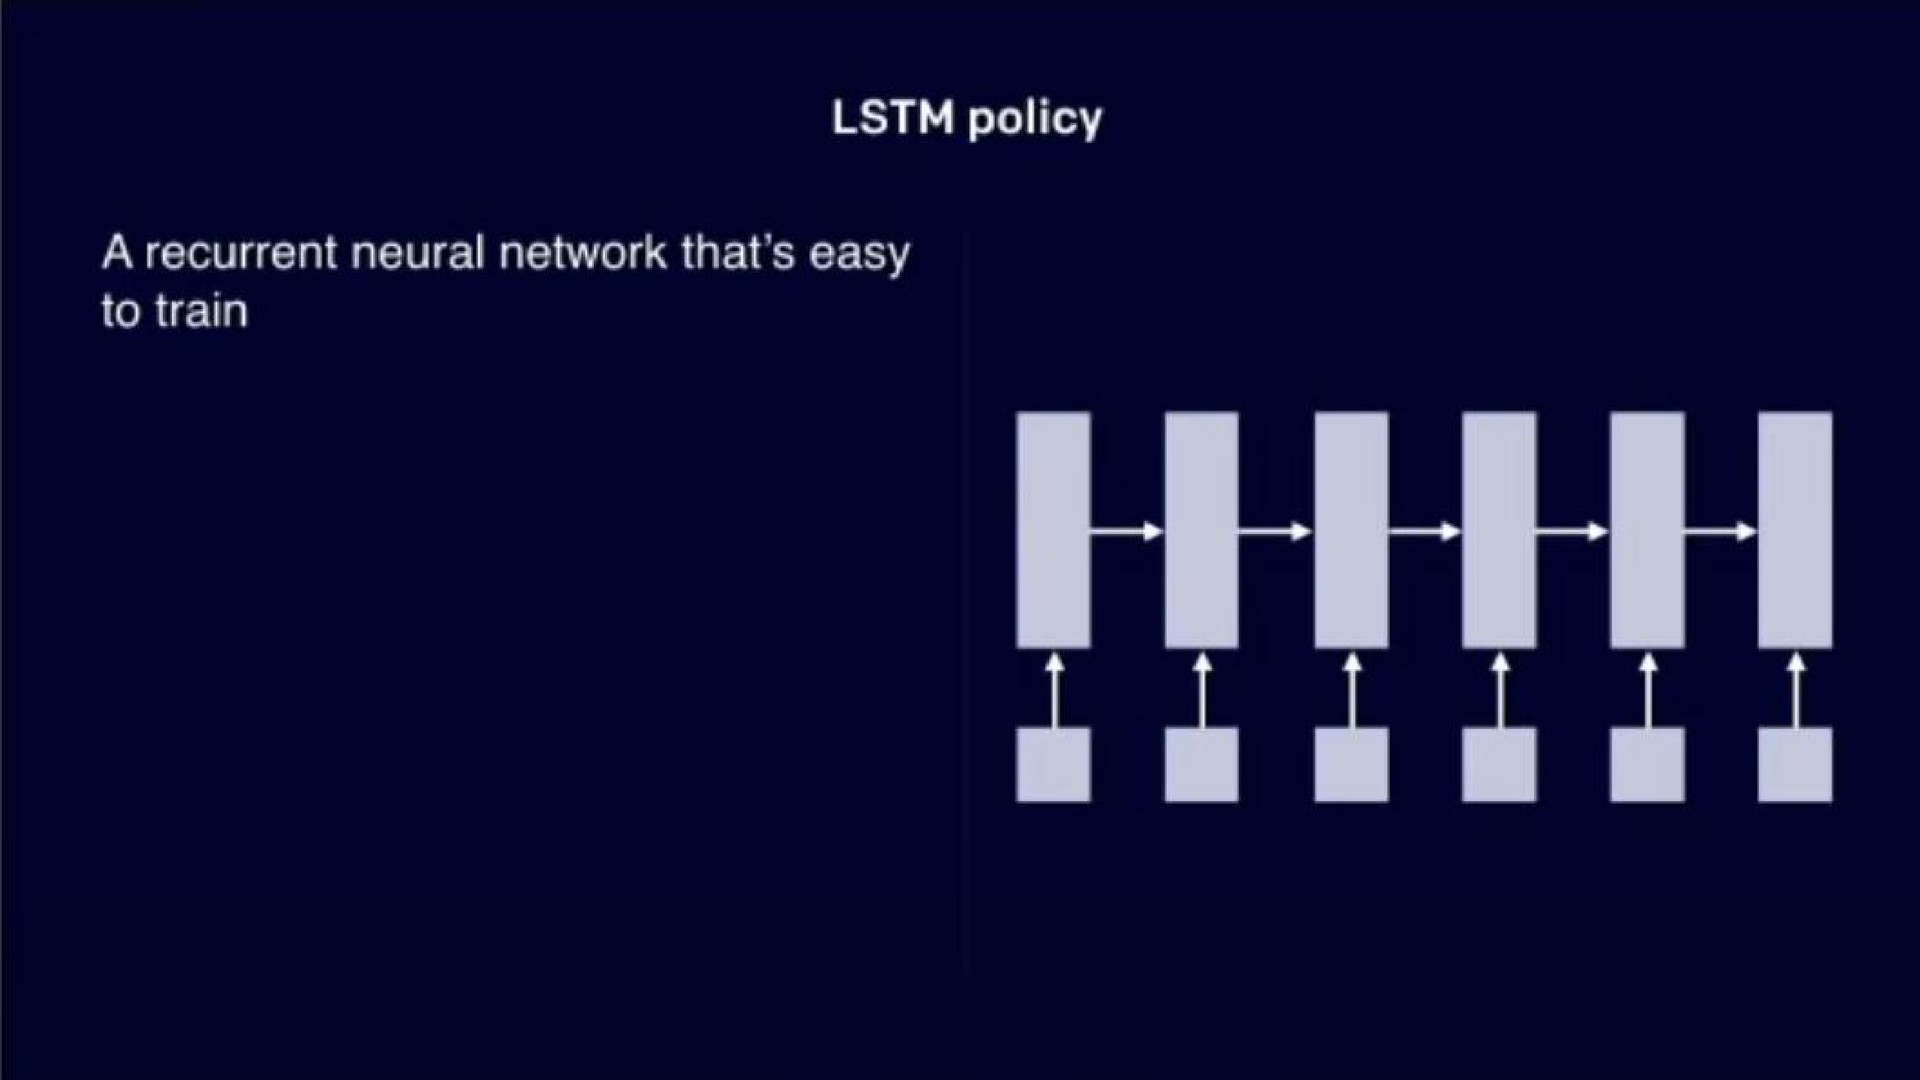 policy a recurrent neural network that easy emesis | OpenAI